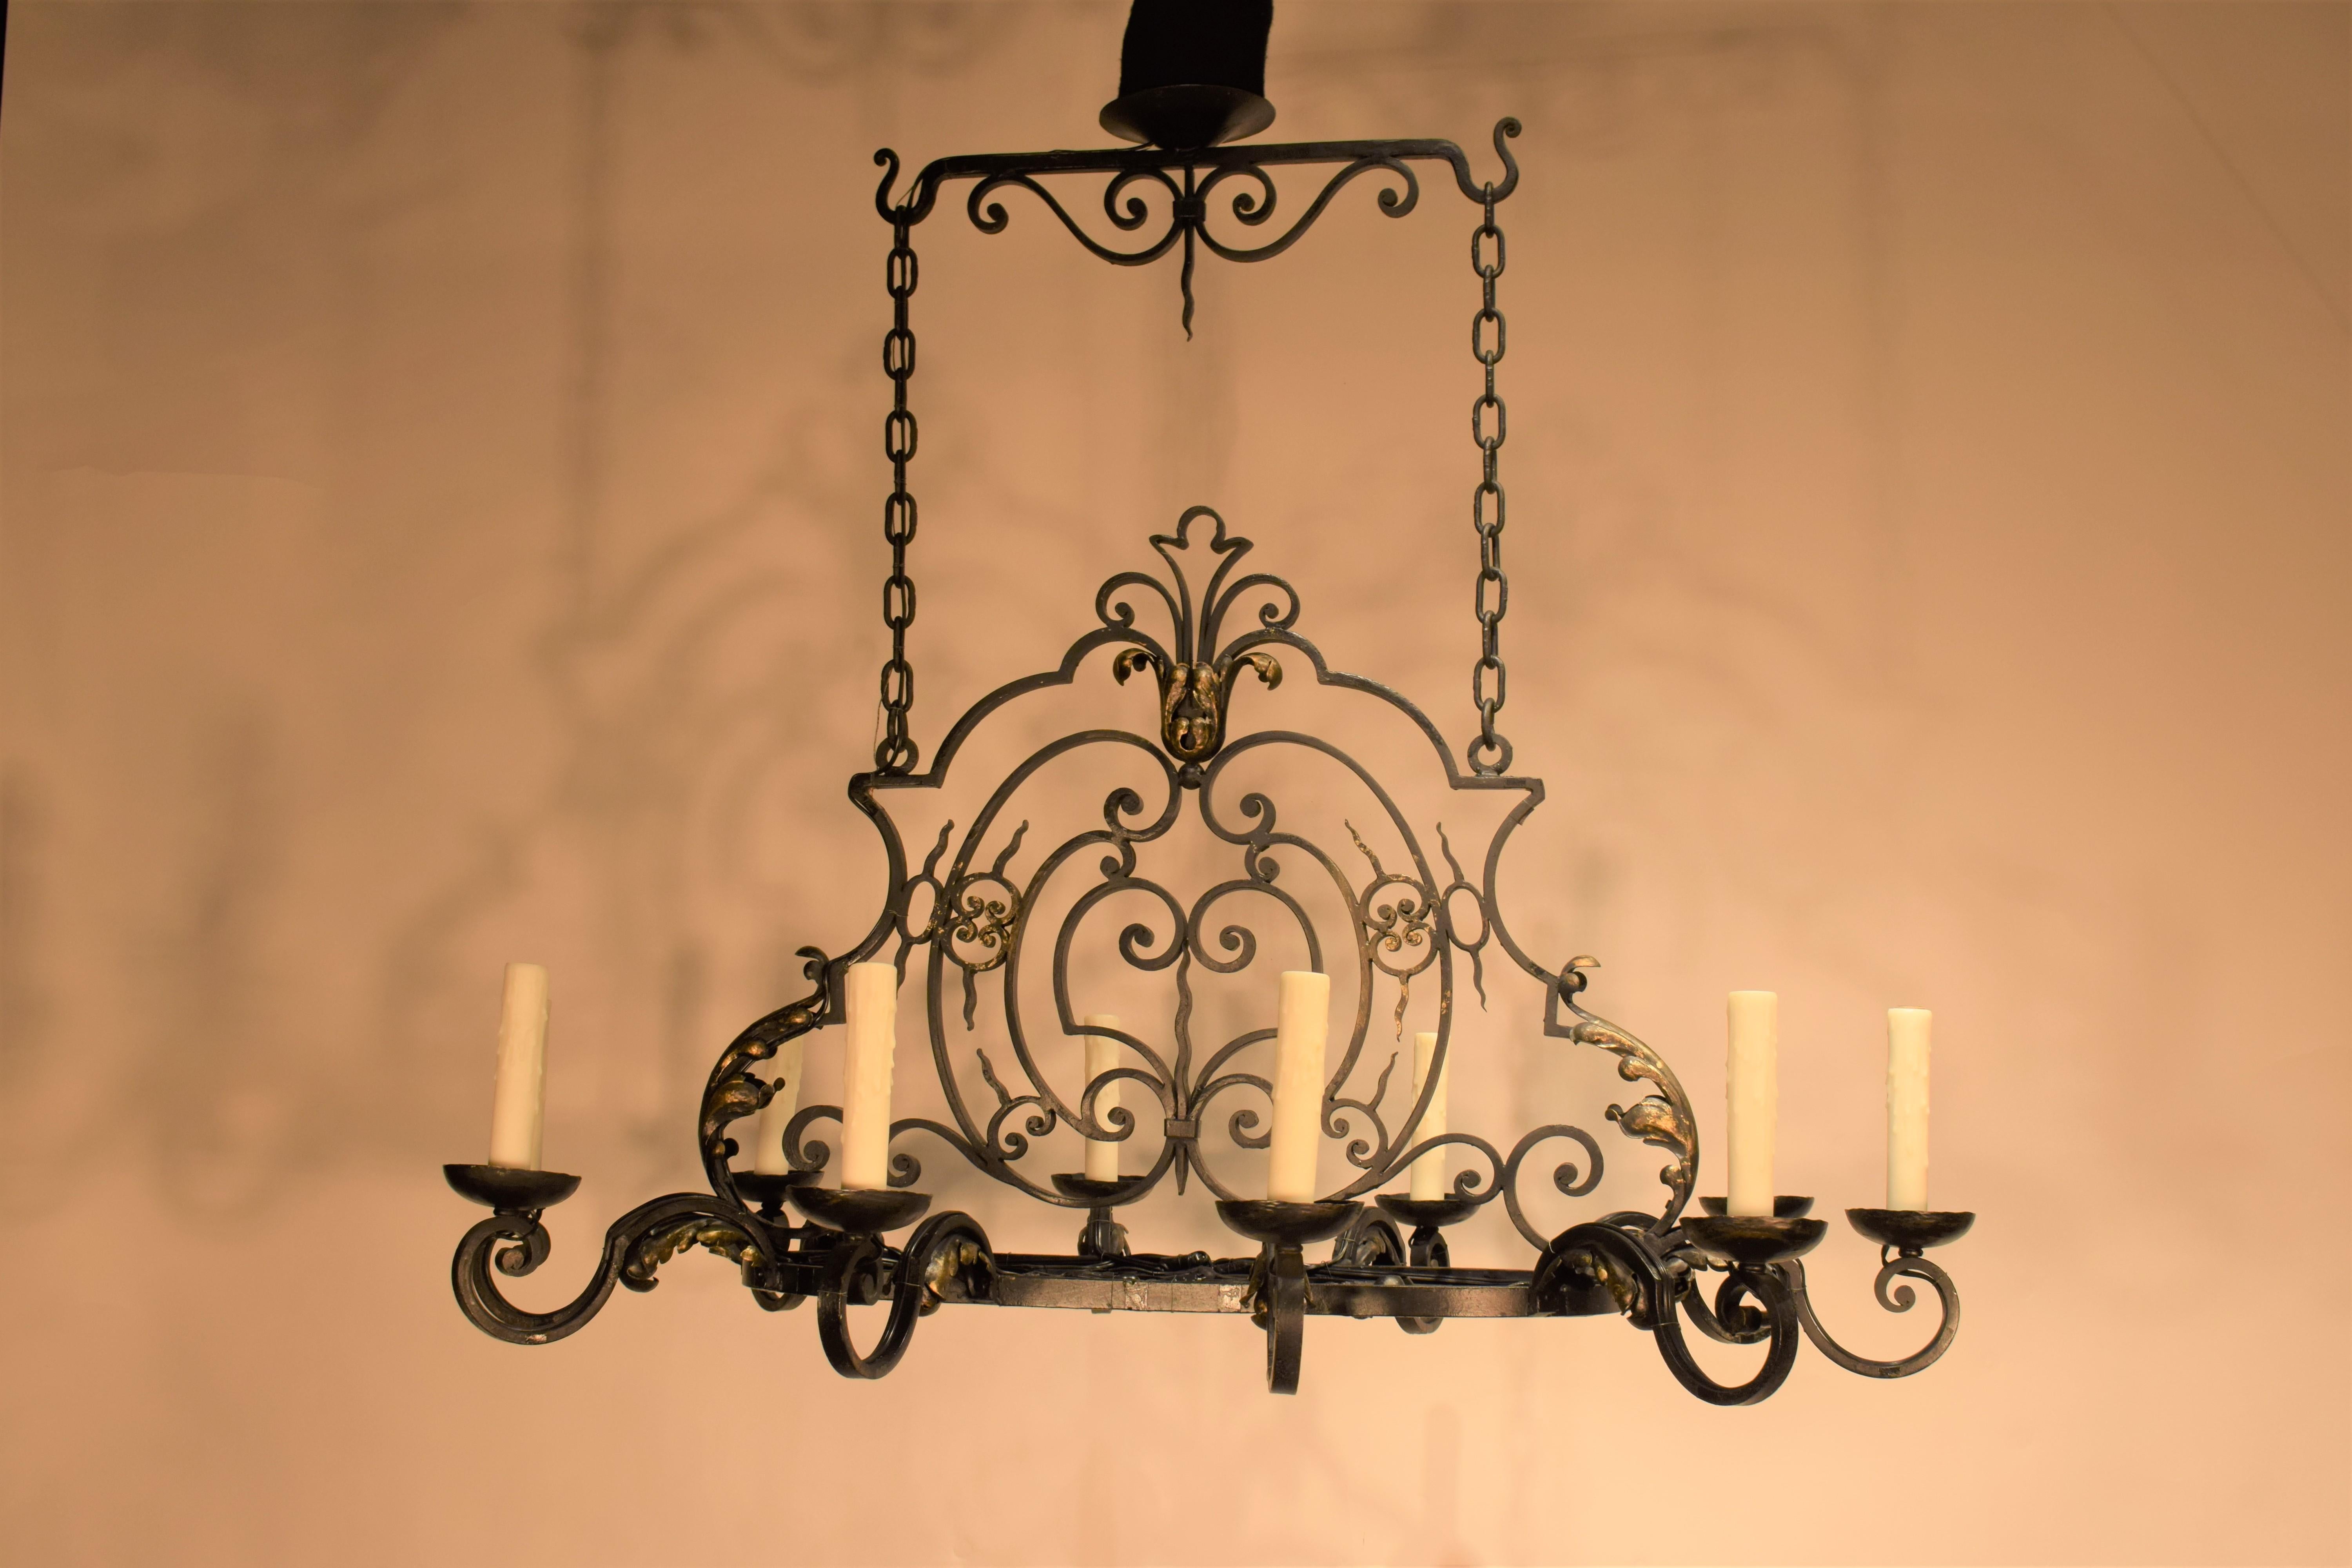 A Very Fine Hand-Hammered Louis XIV style Iron Chandelier. Exquisite Detail. 
10 lights. France, circa 1910.
Dimensions: Height 37